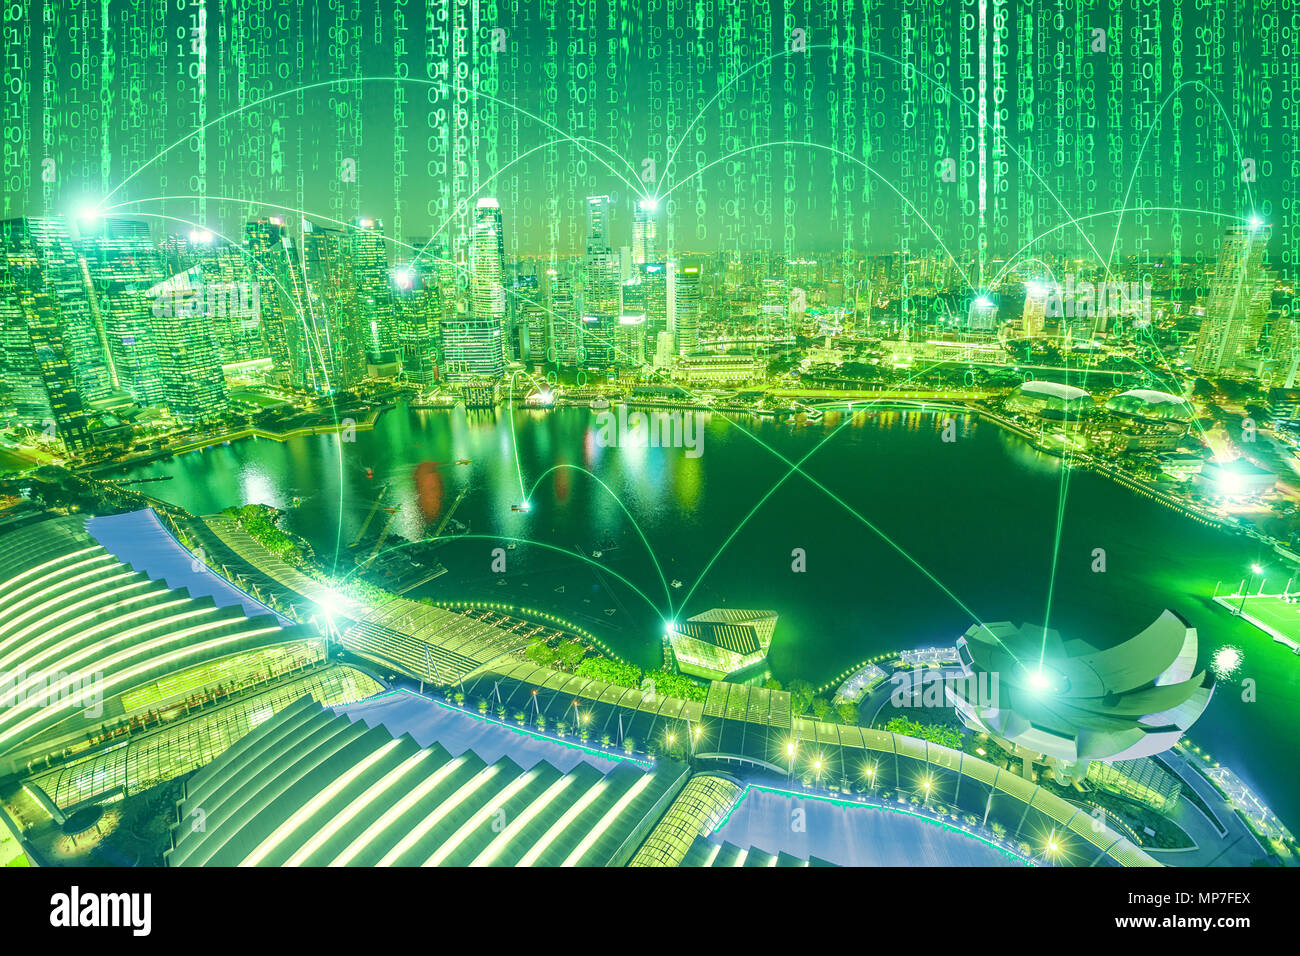 The concept of digital connection and virtual connectivity between buildings of a city. The financial district of Singapore skyline with matrix sky background in green. Stock Photo